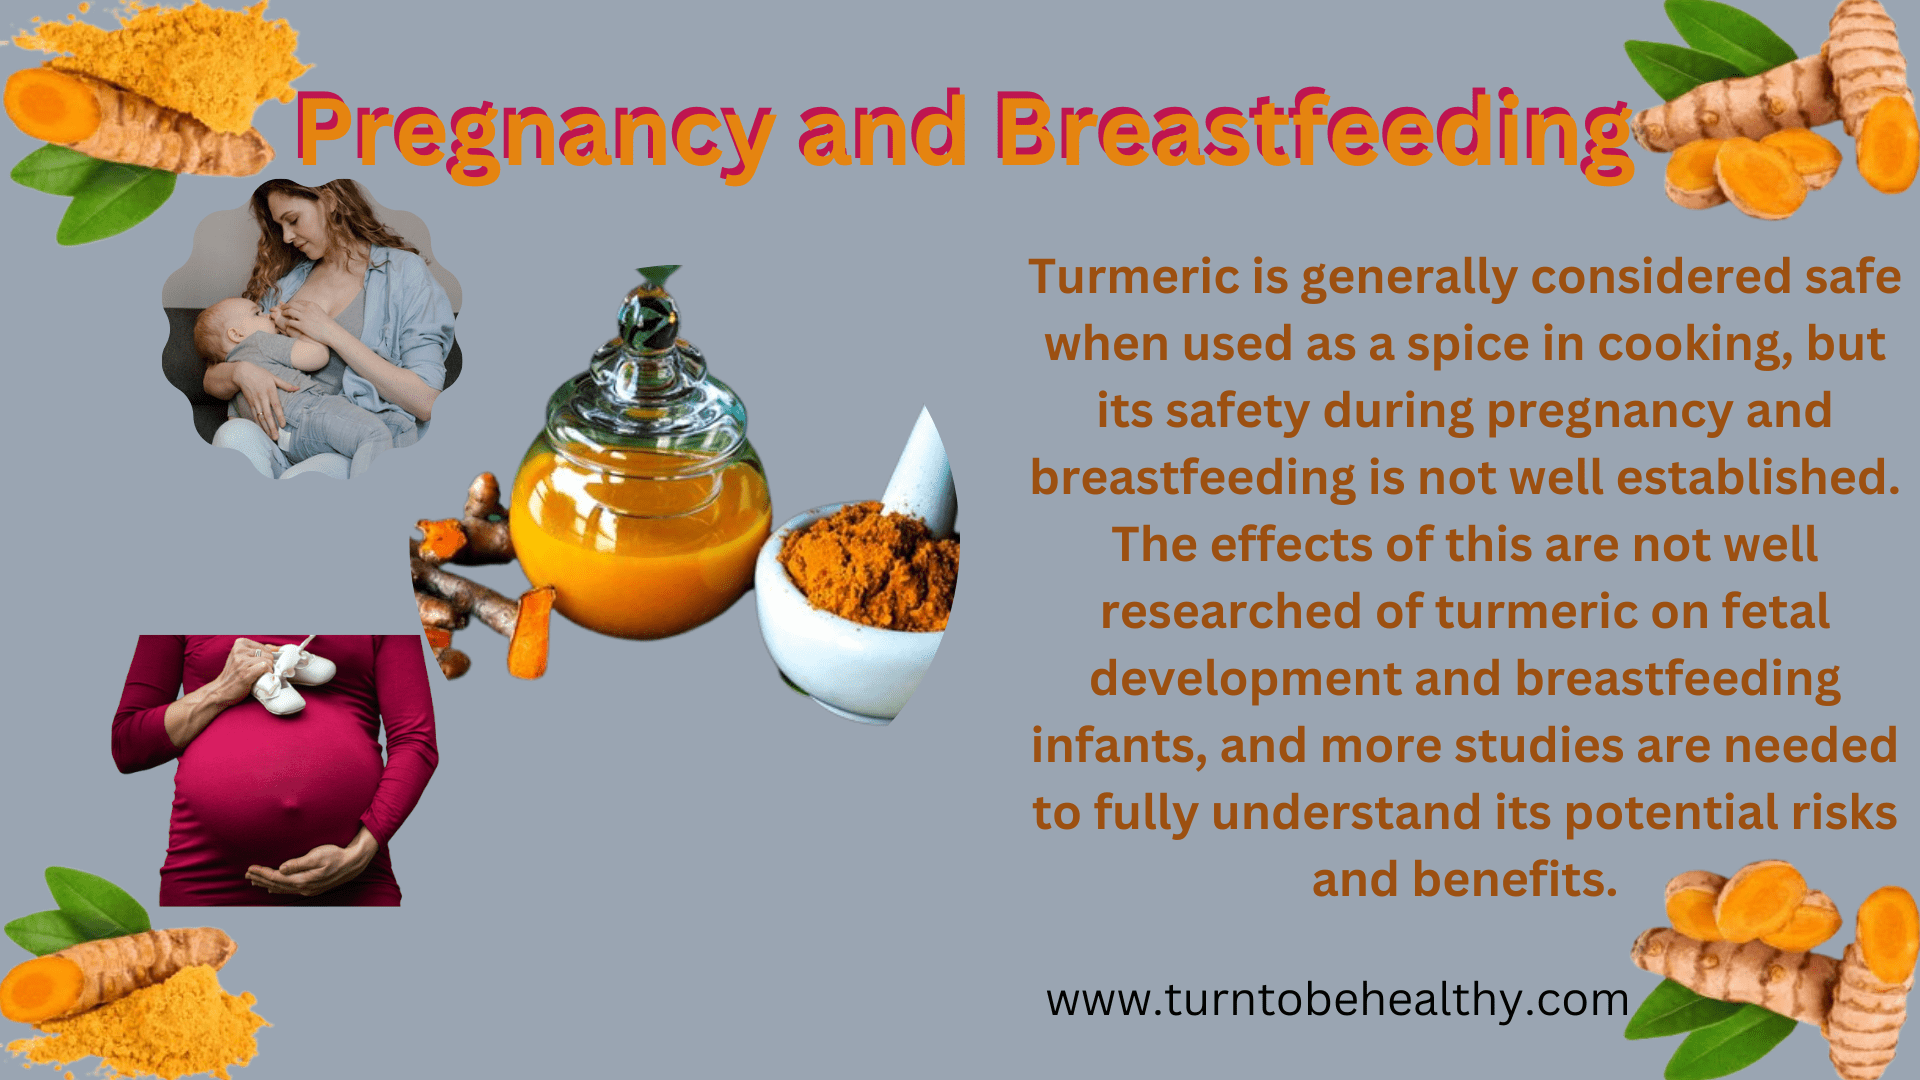 10 Serious Side Effects Turmeric. Turmeric is generally considered safe when used as a spice in cooking, but its safety during pregnancy and breastfeeding is not well established. The effects of this are not well researched of turmeric on fetal development and breastfeeding infants, and more studies are needed to fully understand its potential risks and benefits.